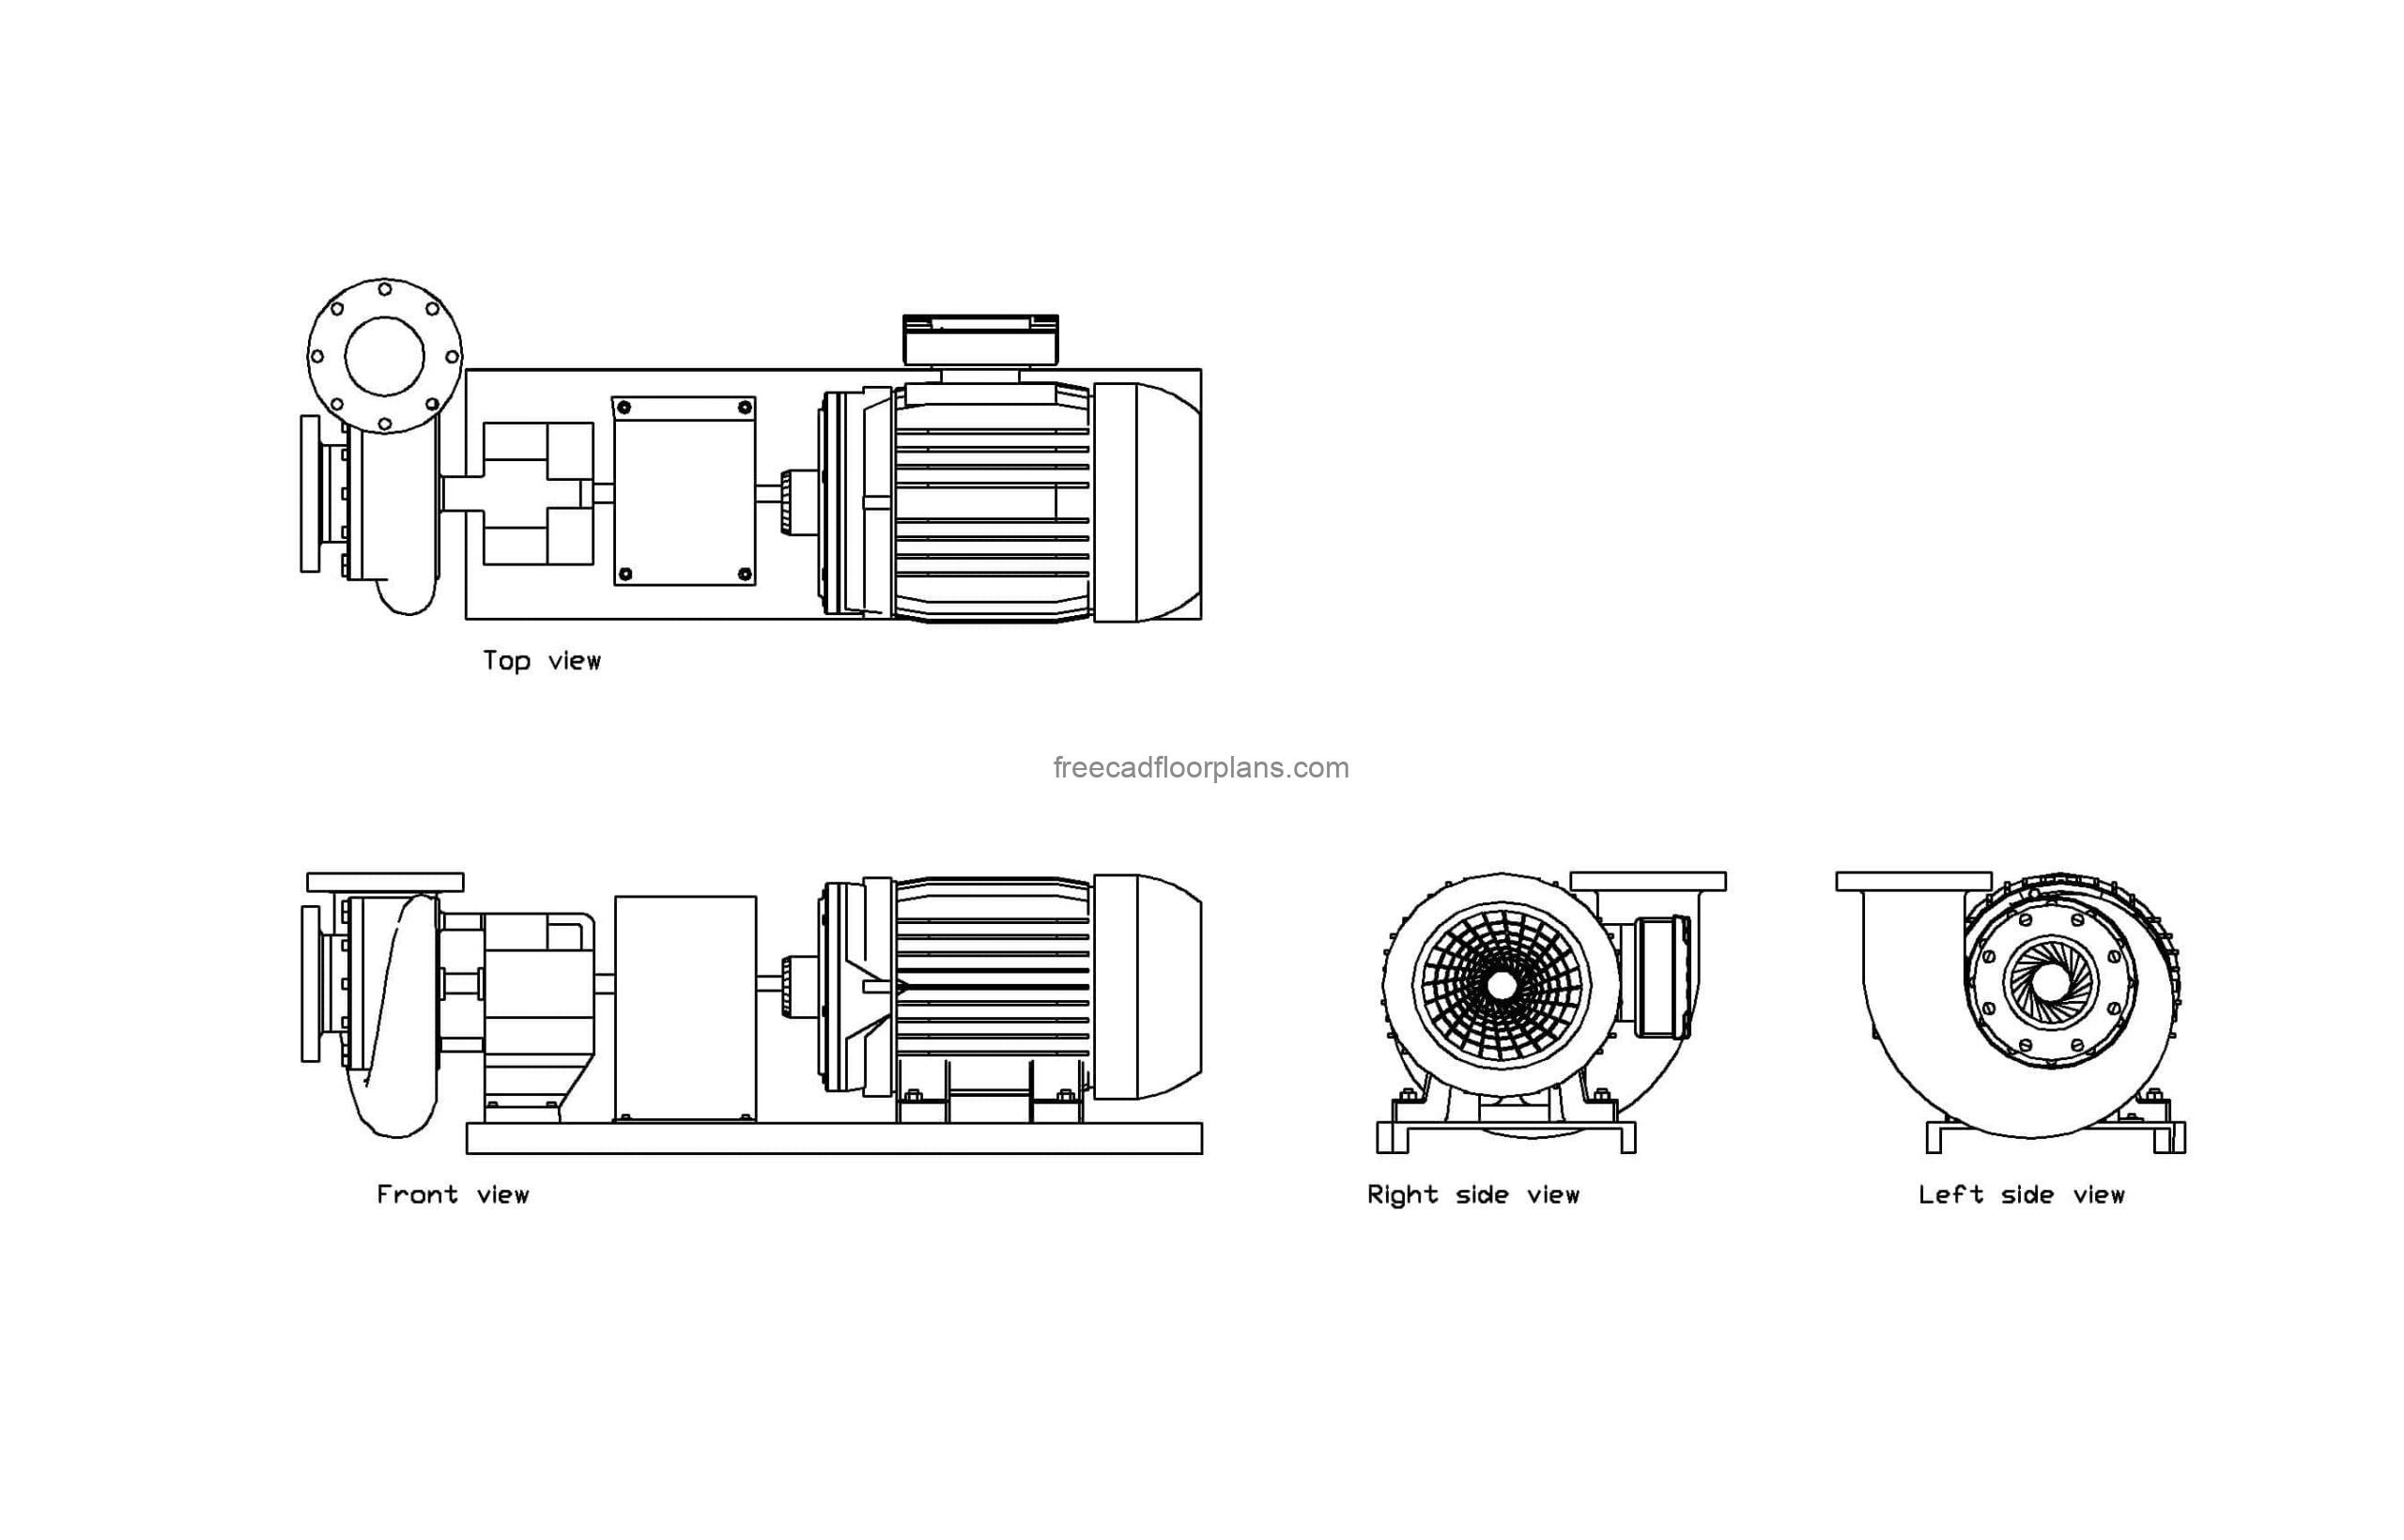 chilled water pump autocad drawing, plan and elevation 2d views, dwg file for free download